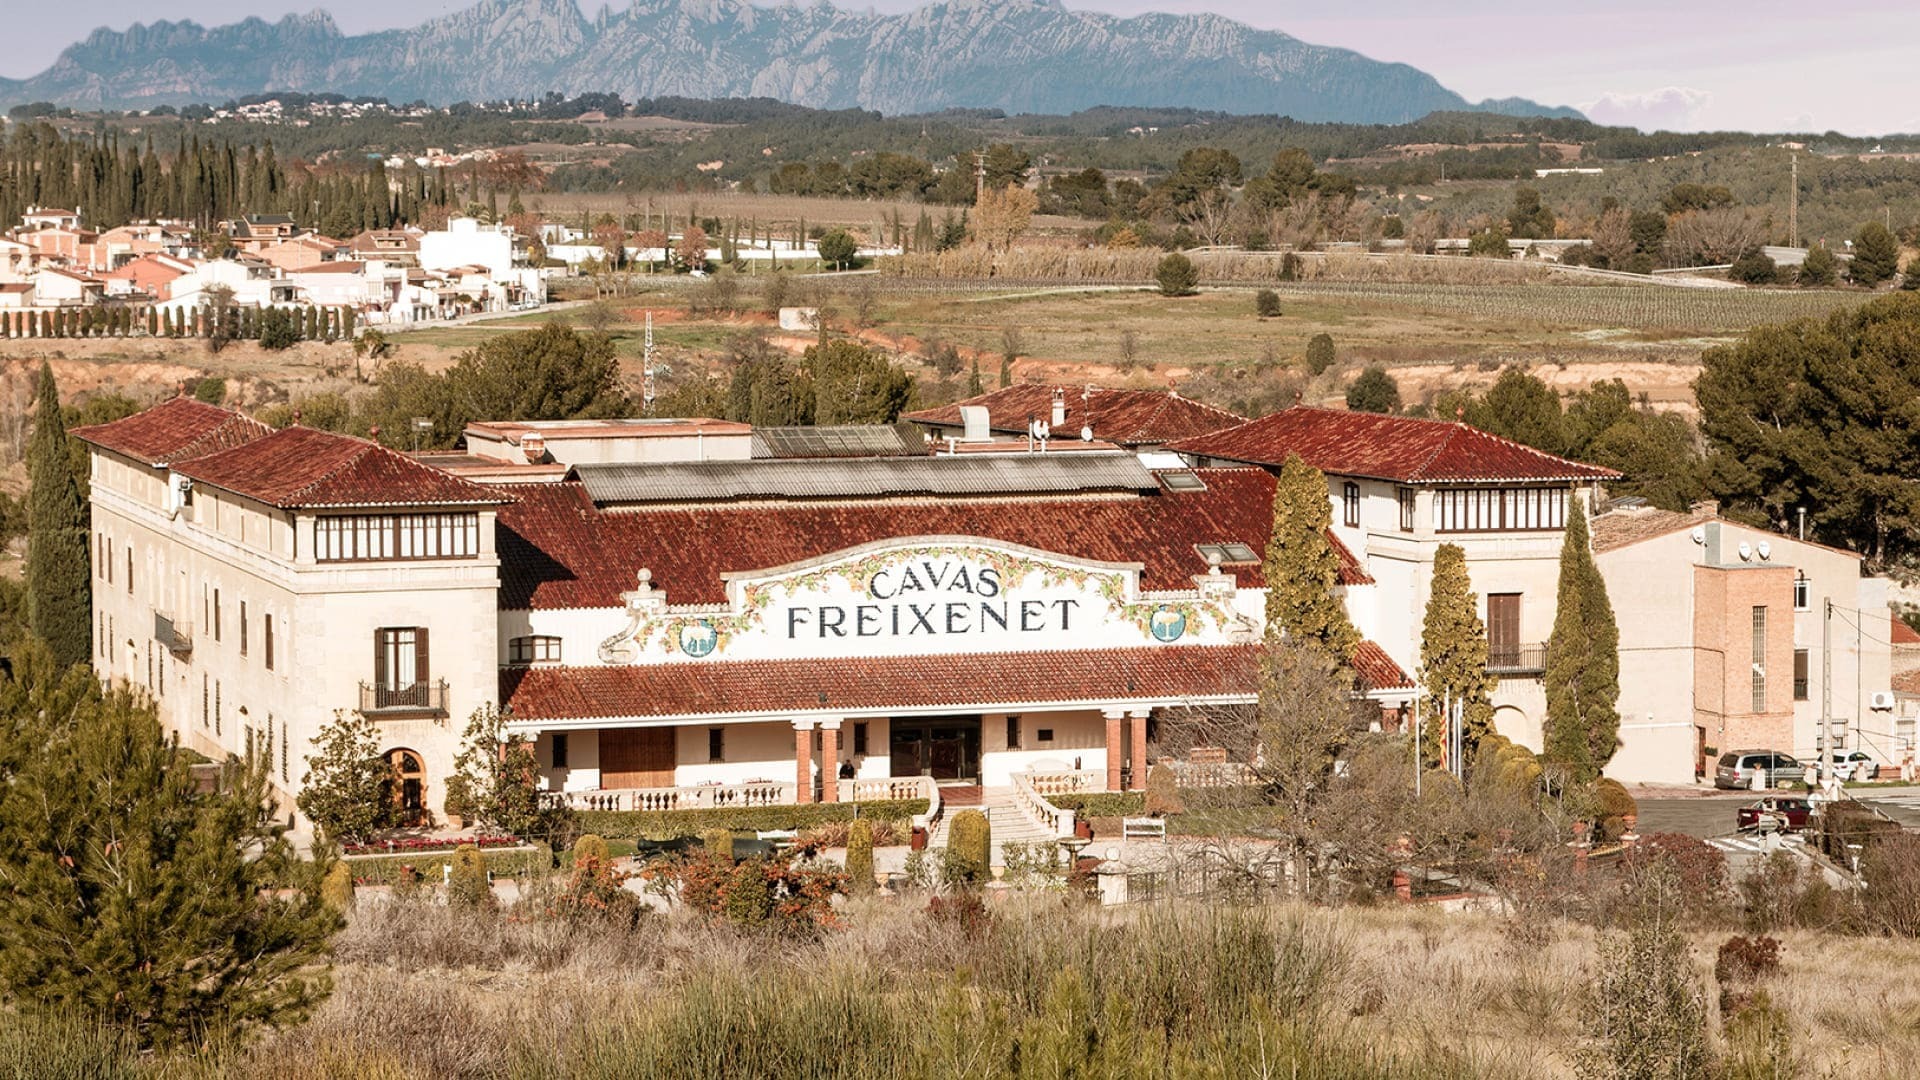 Freixenet Cava headquarters, a large white building with a red roof in the distance. Behind are vineyards, farmland and mountains.